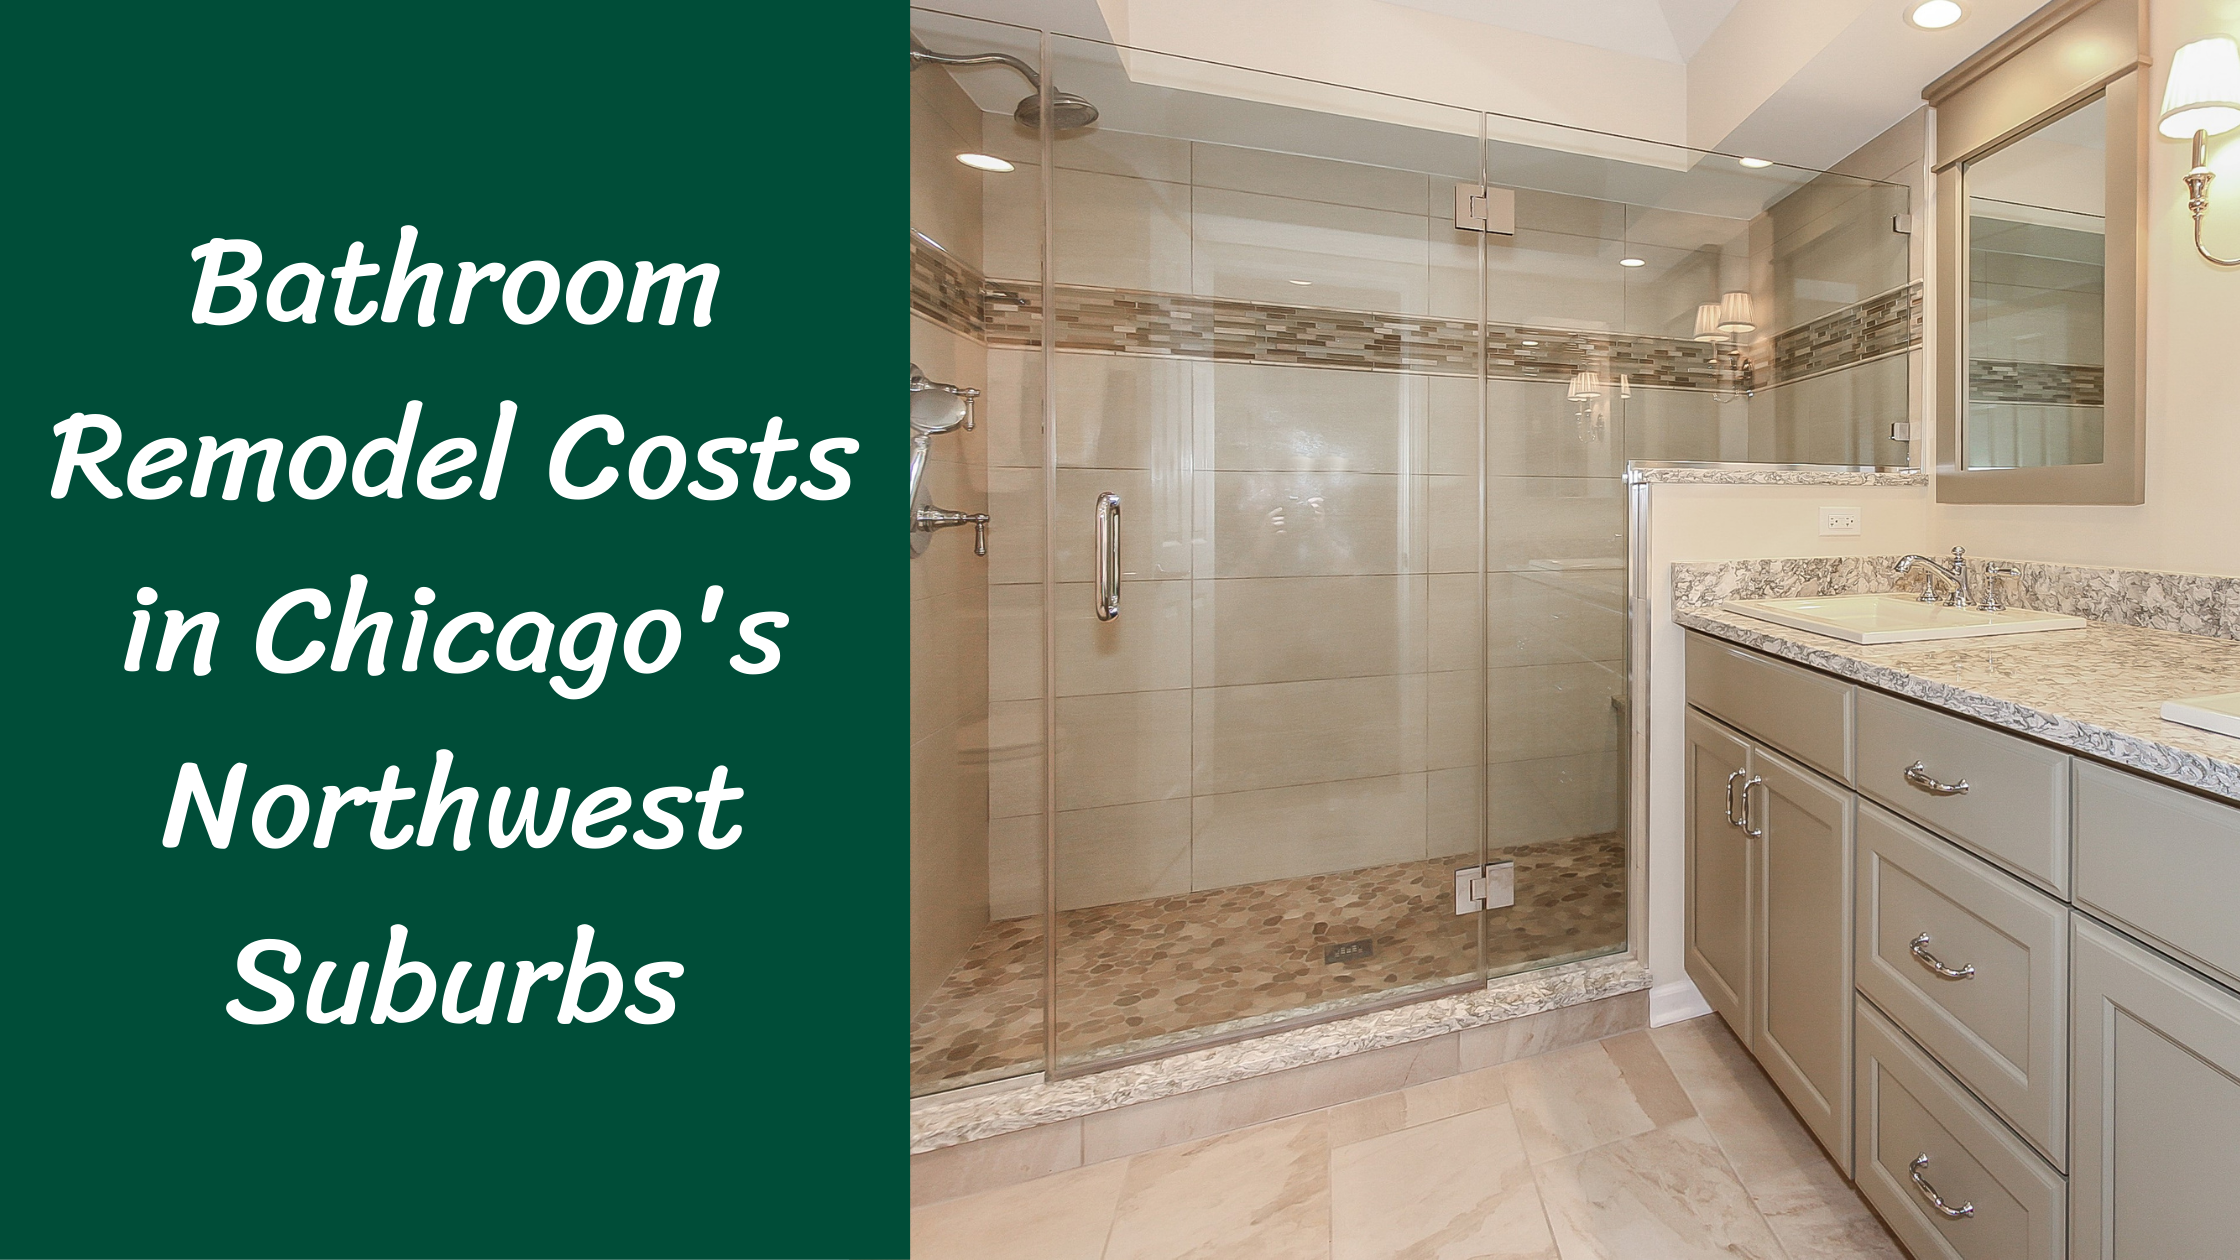 How Much Does A Bathroom Remodel Cost, How Much Does It Cost To Remodel 2 Bathrooms